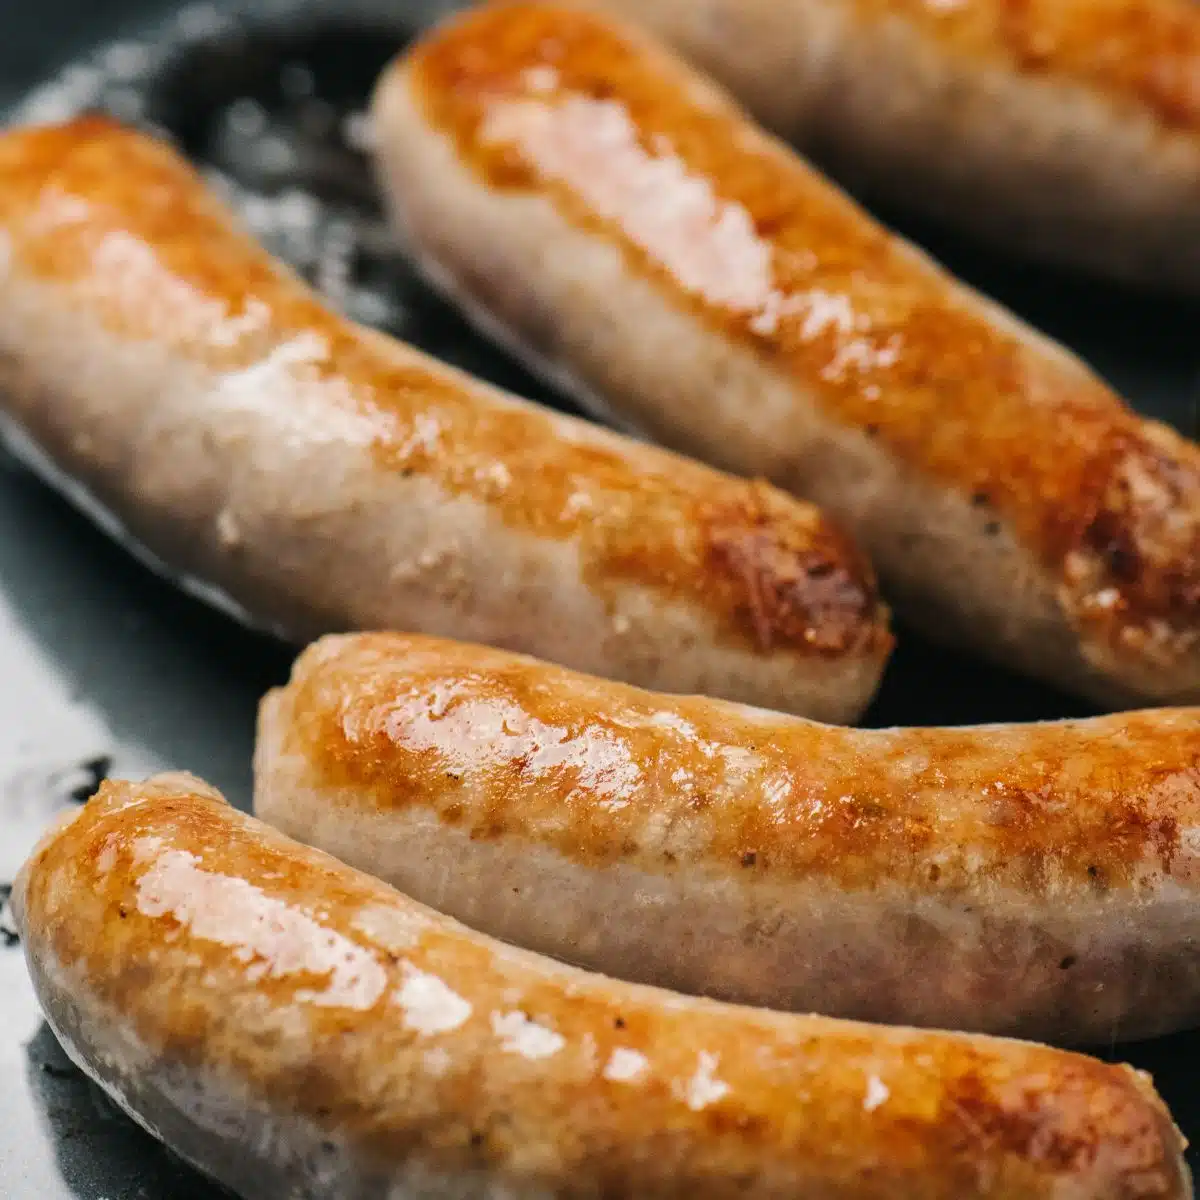 How To Pan Fry Italian Sausage: A Step-By-Step Guide